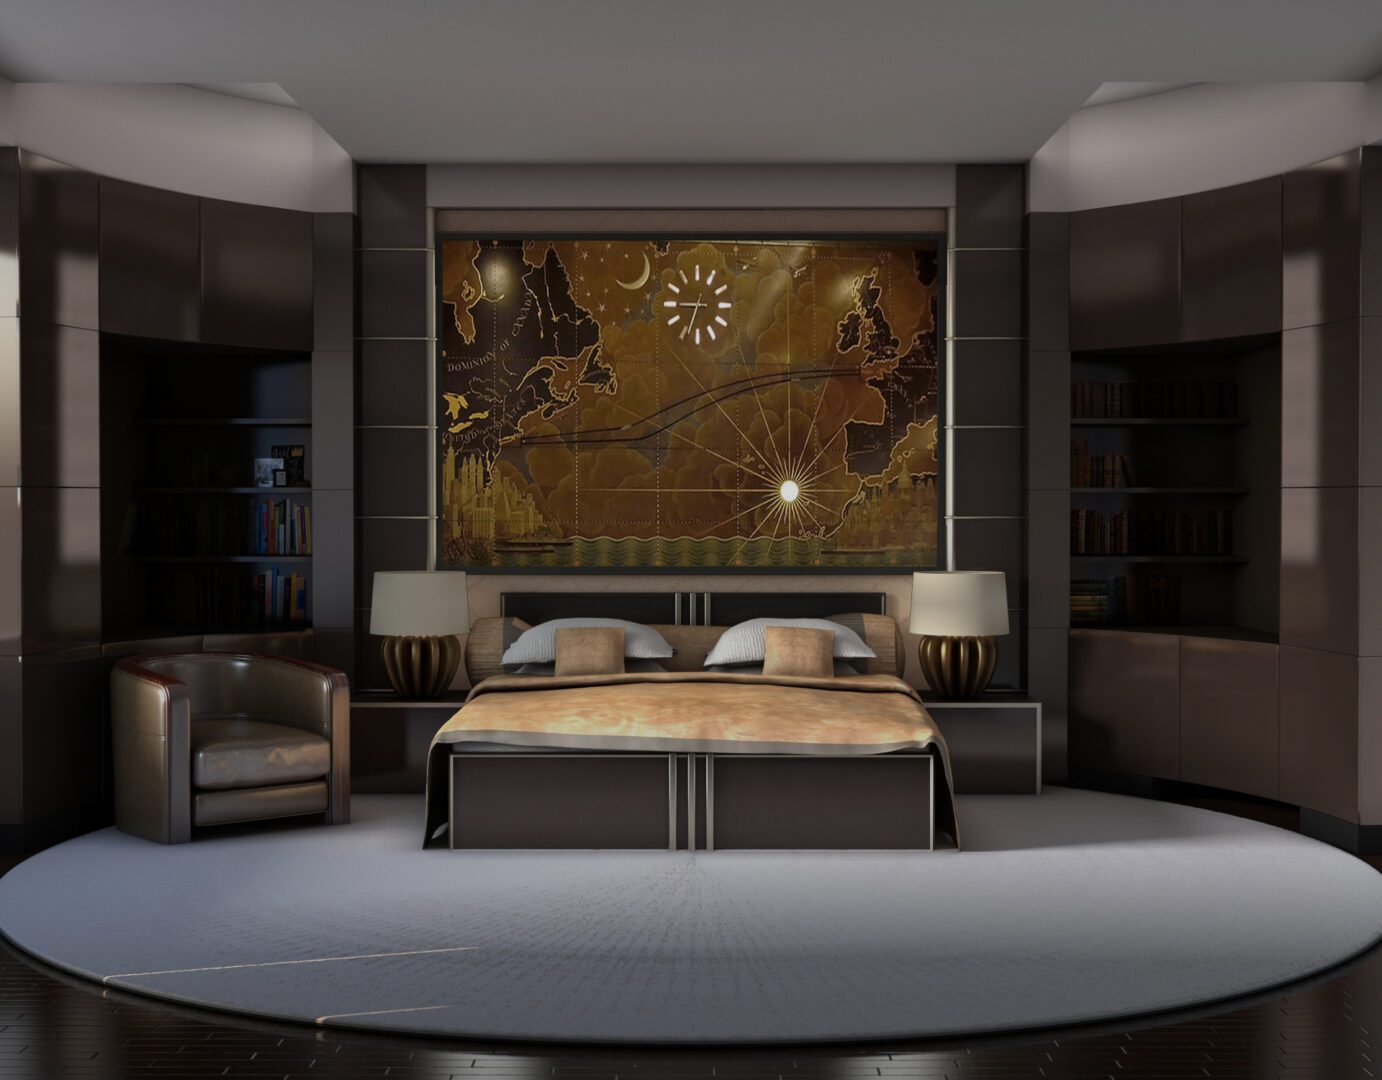 Fantastic designs provided in a bedroom